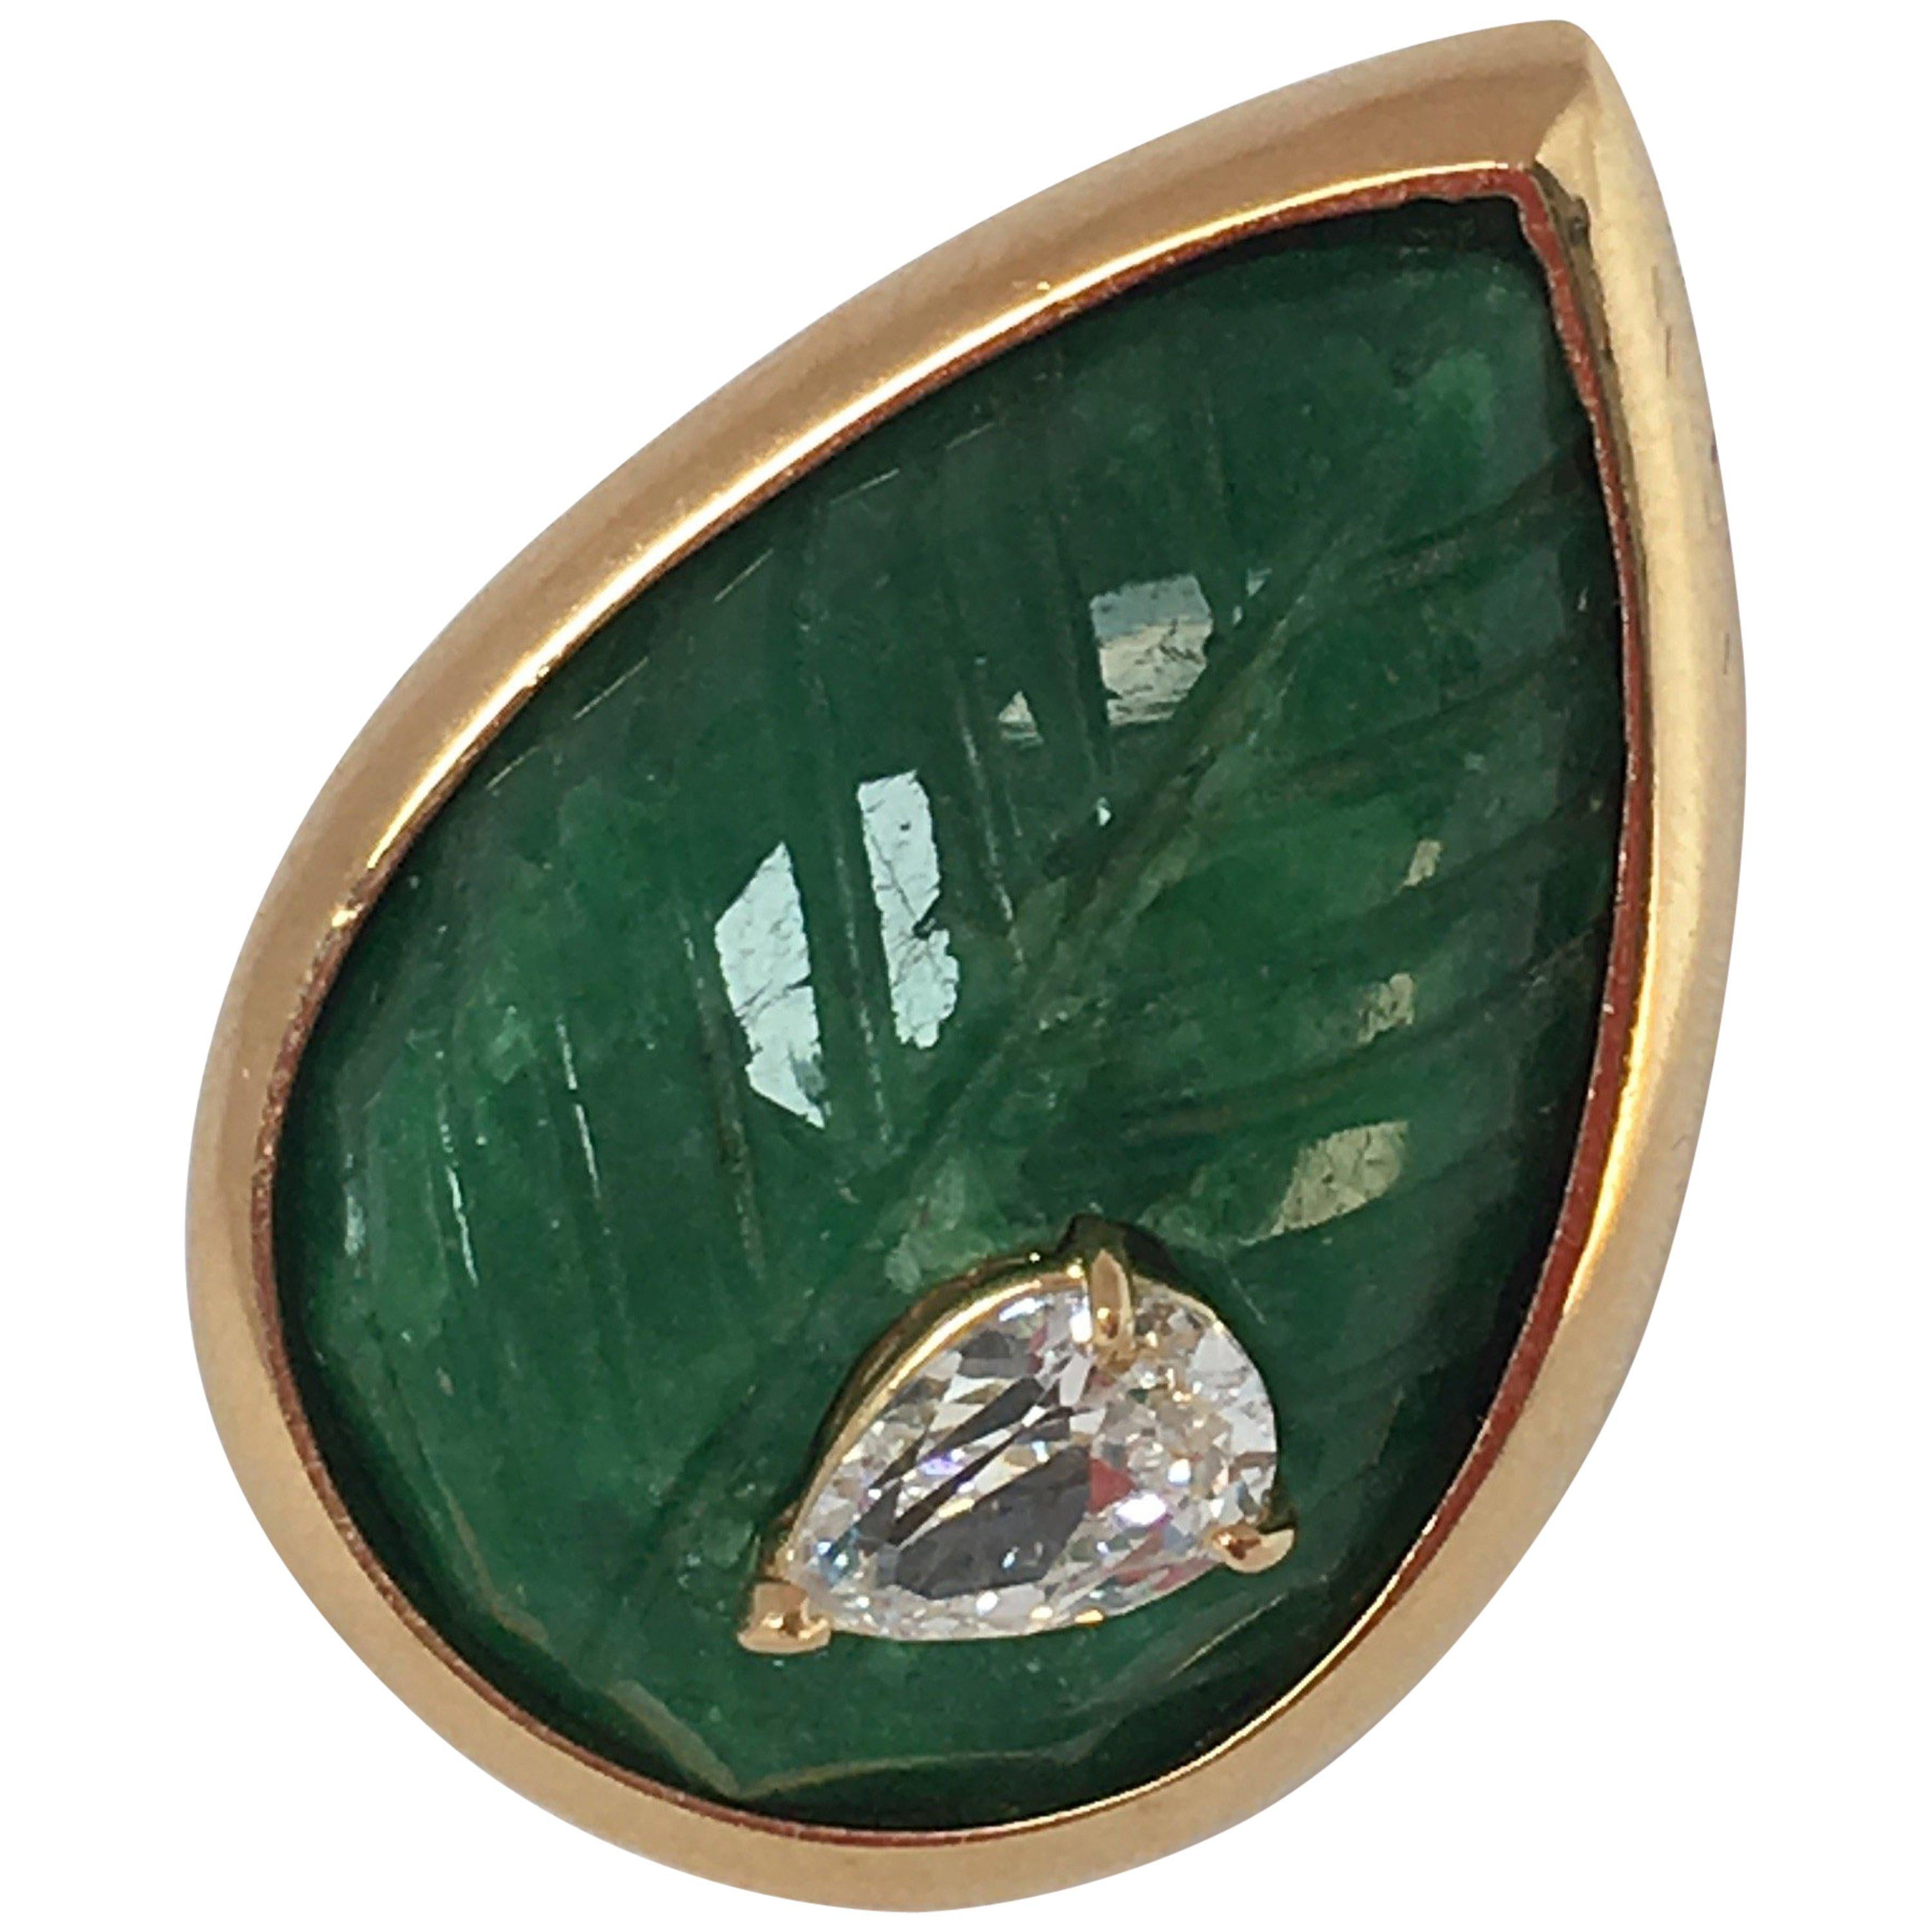 Engrave emerald leaf like a drop, drop of kunzite, diamonds polish gold gr. 13.
size 13 eu. Modern and contemporary line.
All Giulia Colussi jewelry is new and has never been previously owned or worn. Each item will arrive at your door beautifully